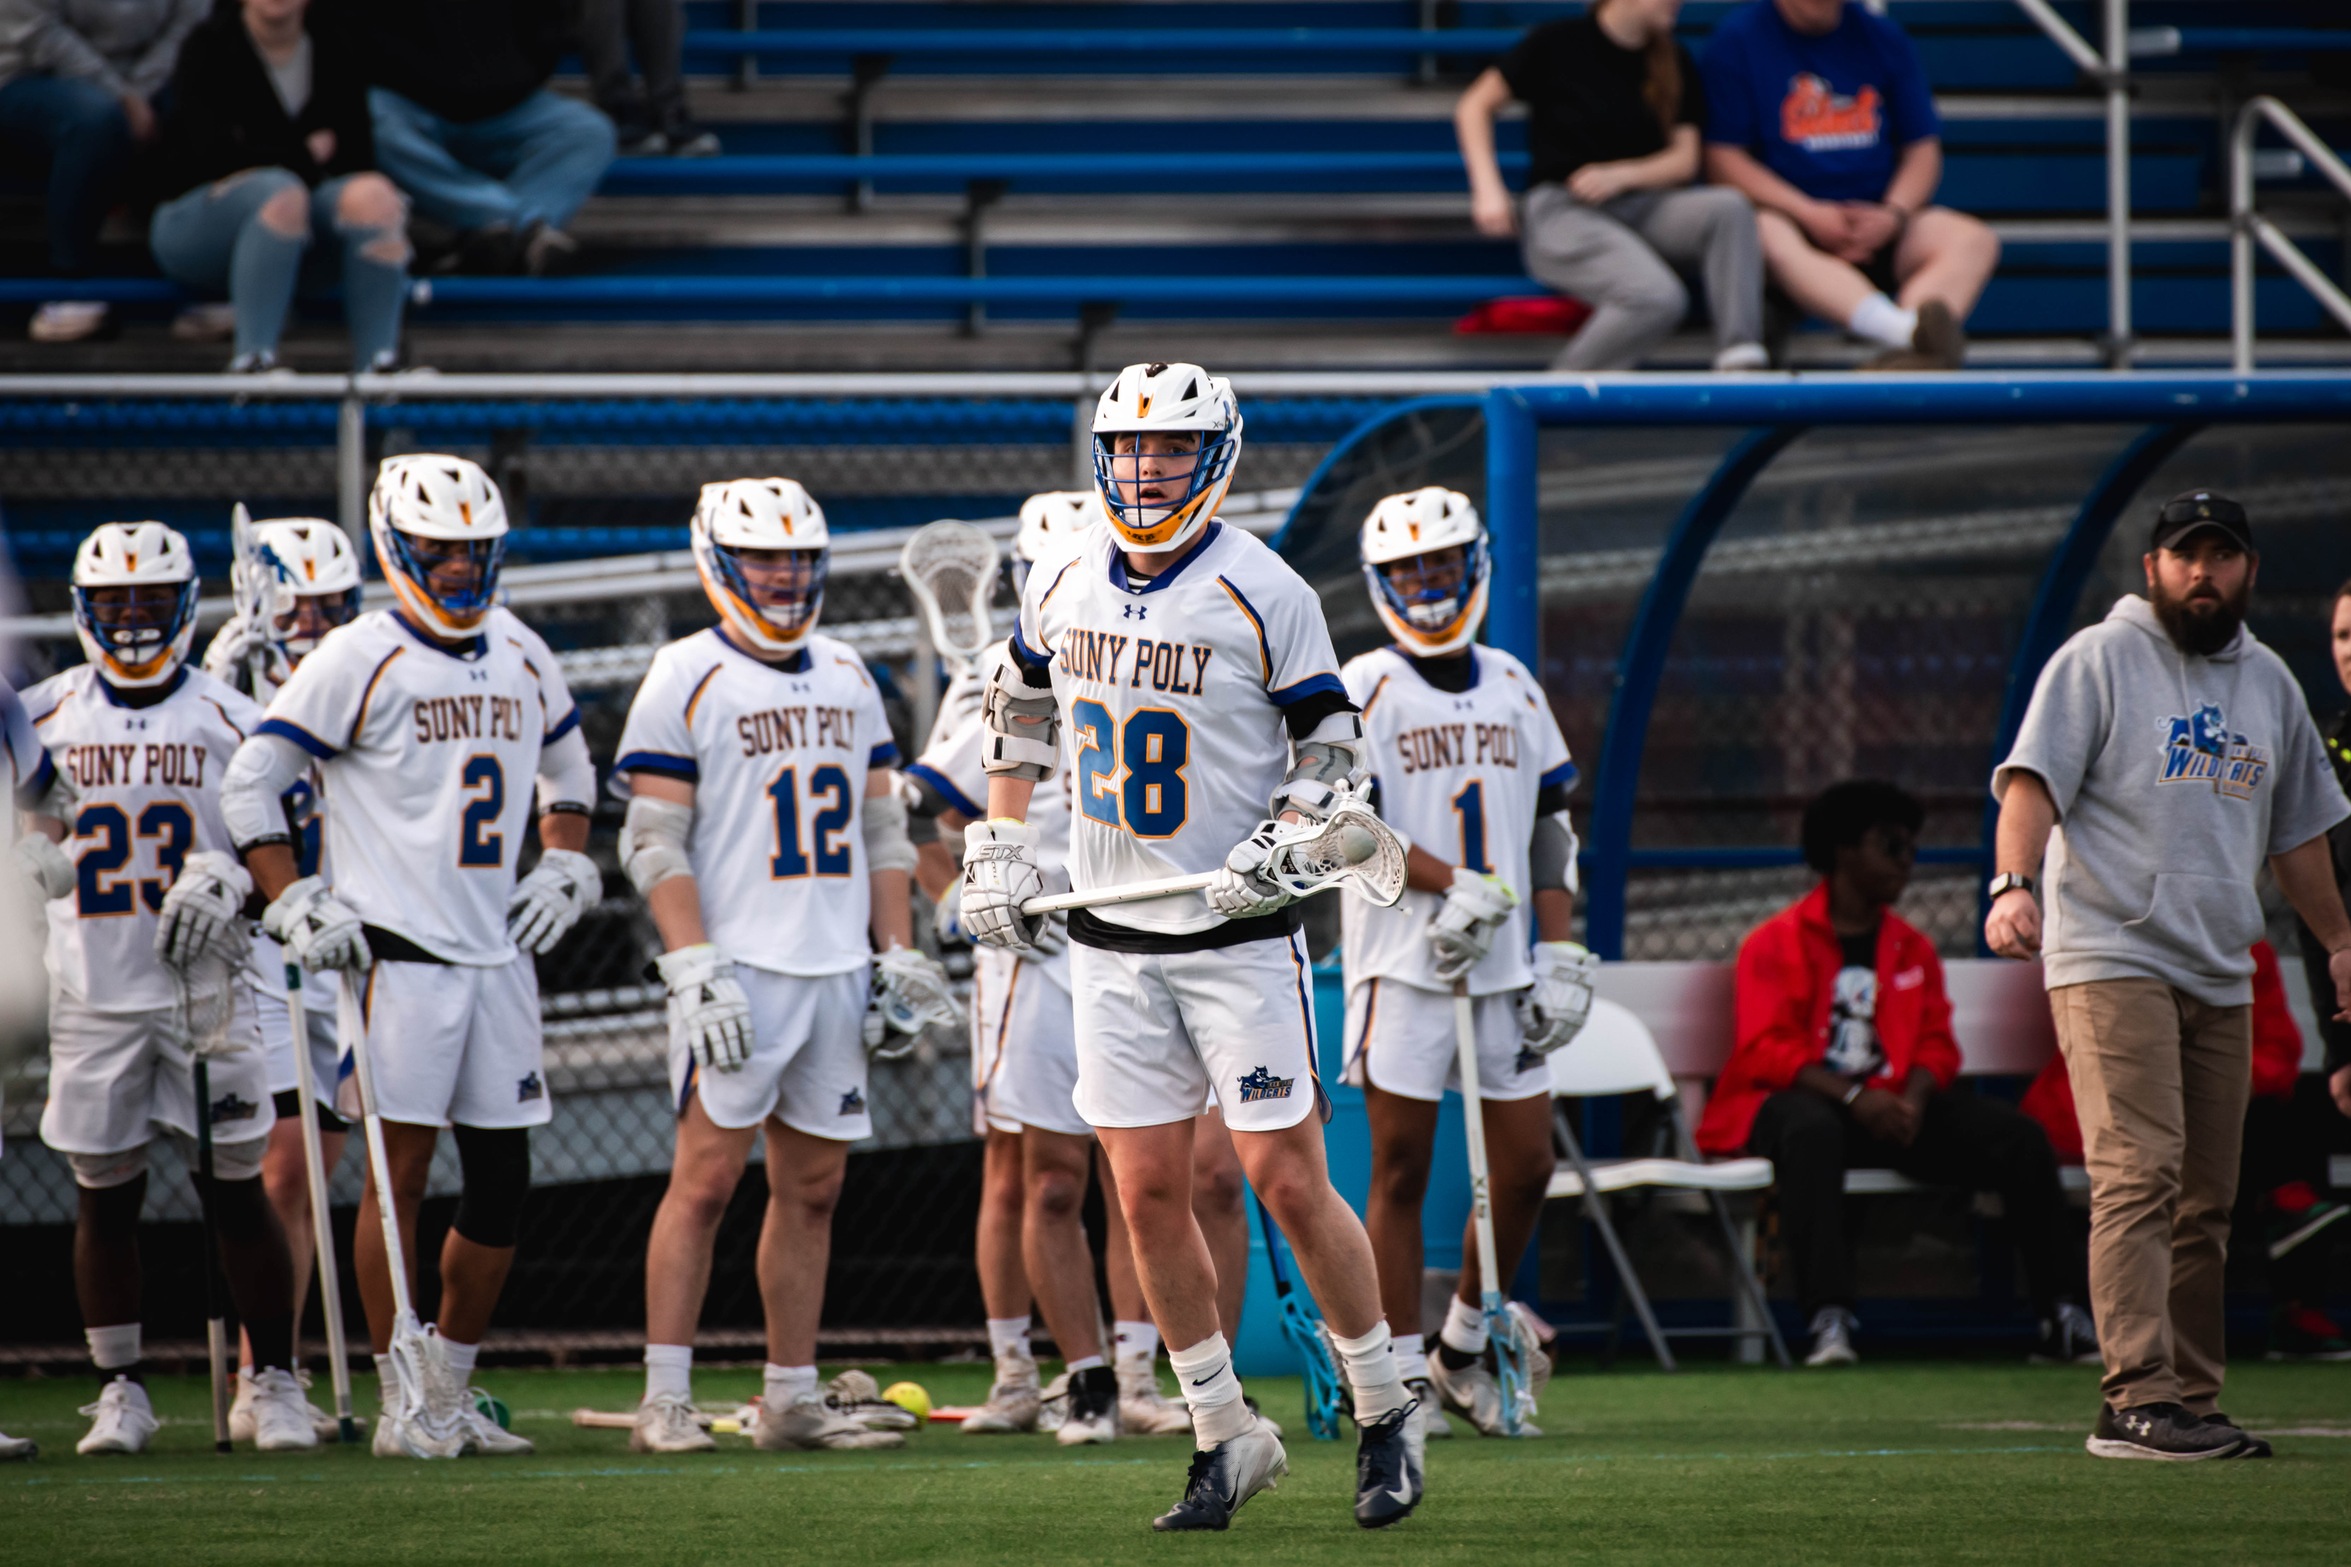 MLAX: Wildcats Lose on the Road to New Paltz.